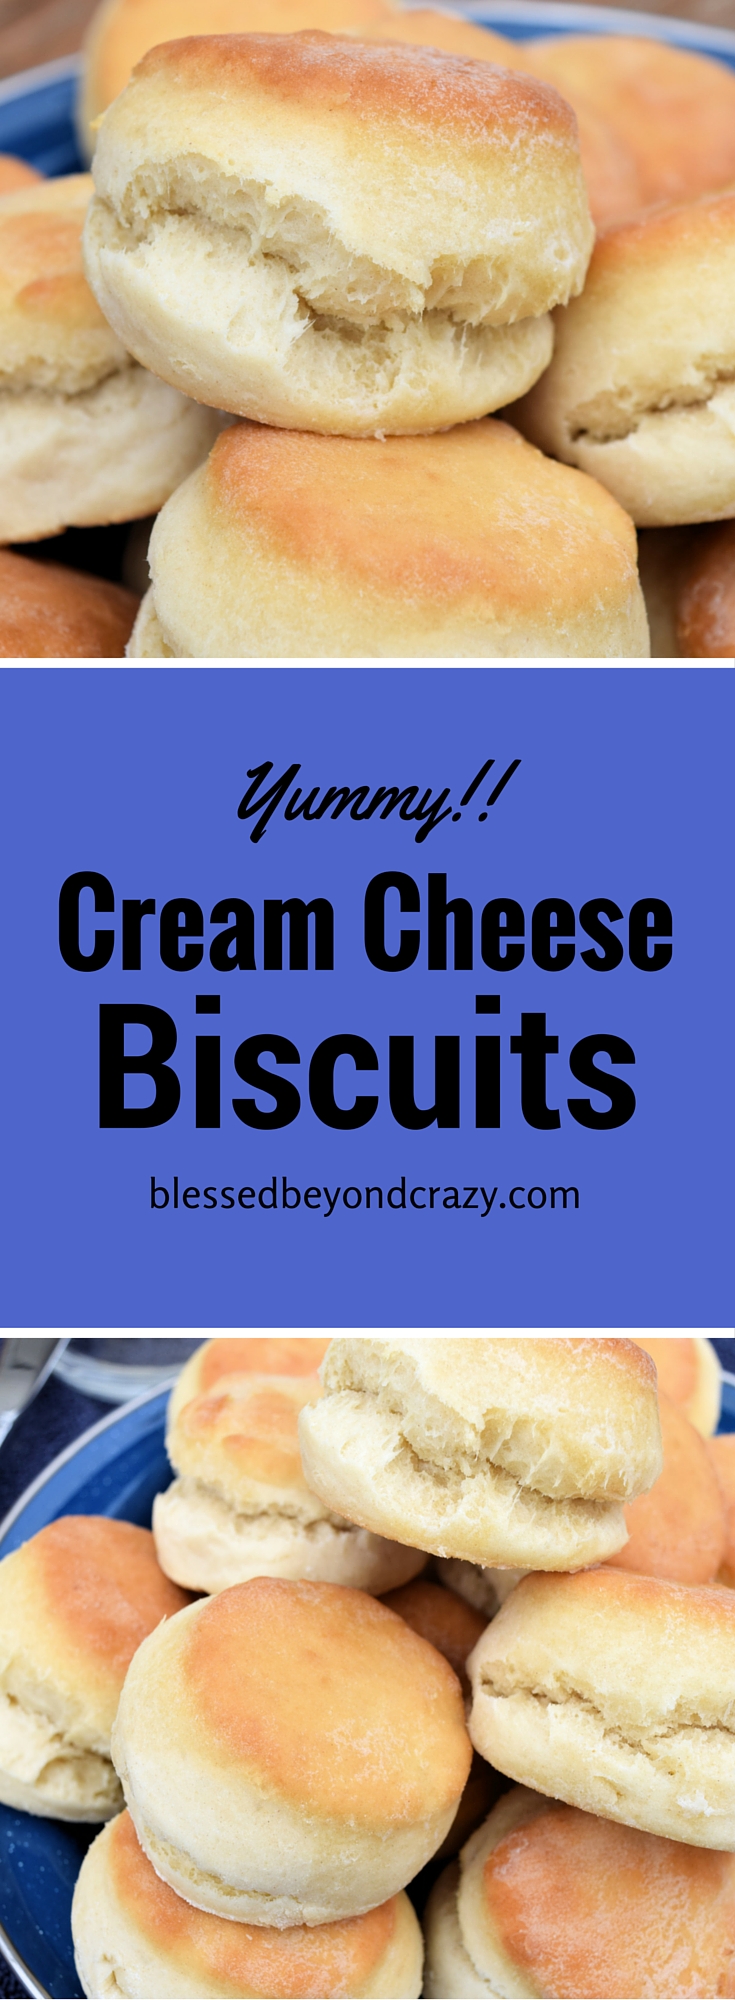 Cream Cheese Biscuits 1